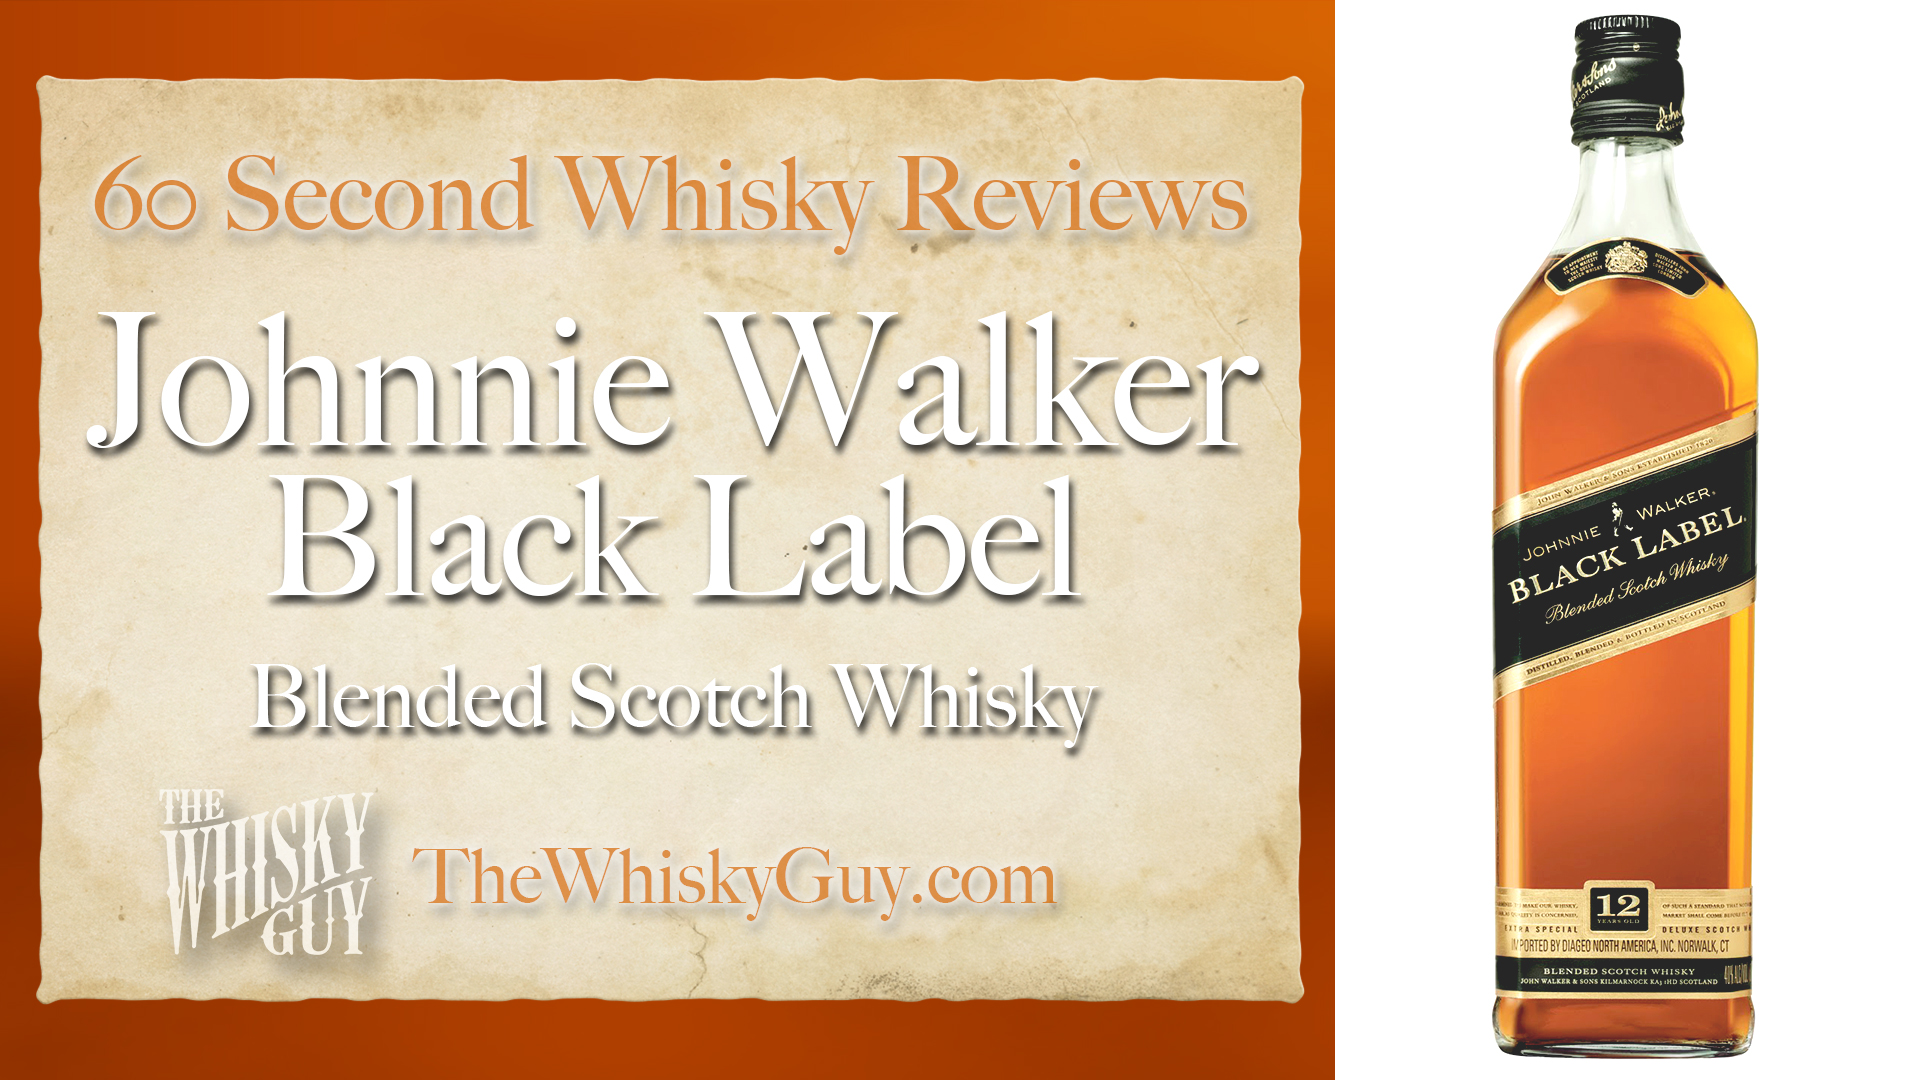 Does Johnnie Walker Black Label Blended Scotch Whisky belong in your liquor cabinet? Is it worth the price at the bar? Give The Whisky Guy 60 seconds and find out! In just 60 seconds, The Whisky Guy reviews Irish Whiskey, Scotch Whisky, Single Malt, Canadian Whisky, Bourbon Whiskey, Japanese Whisky and other whiskies from around the world. Find more at TheWhiskyGuy.com. All original content © Ari Shapiro - TheWhiskyGuy.com